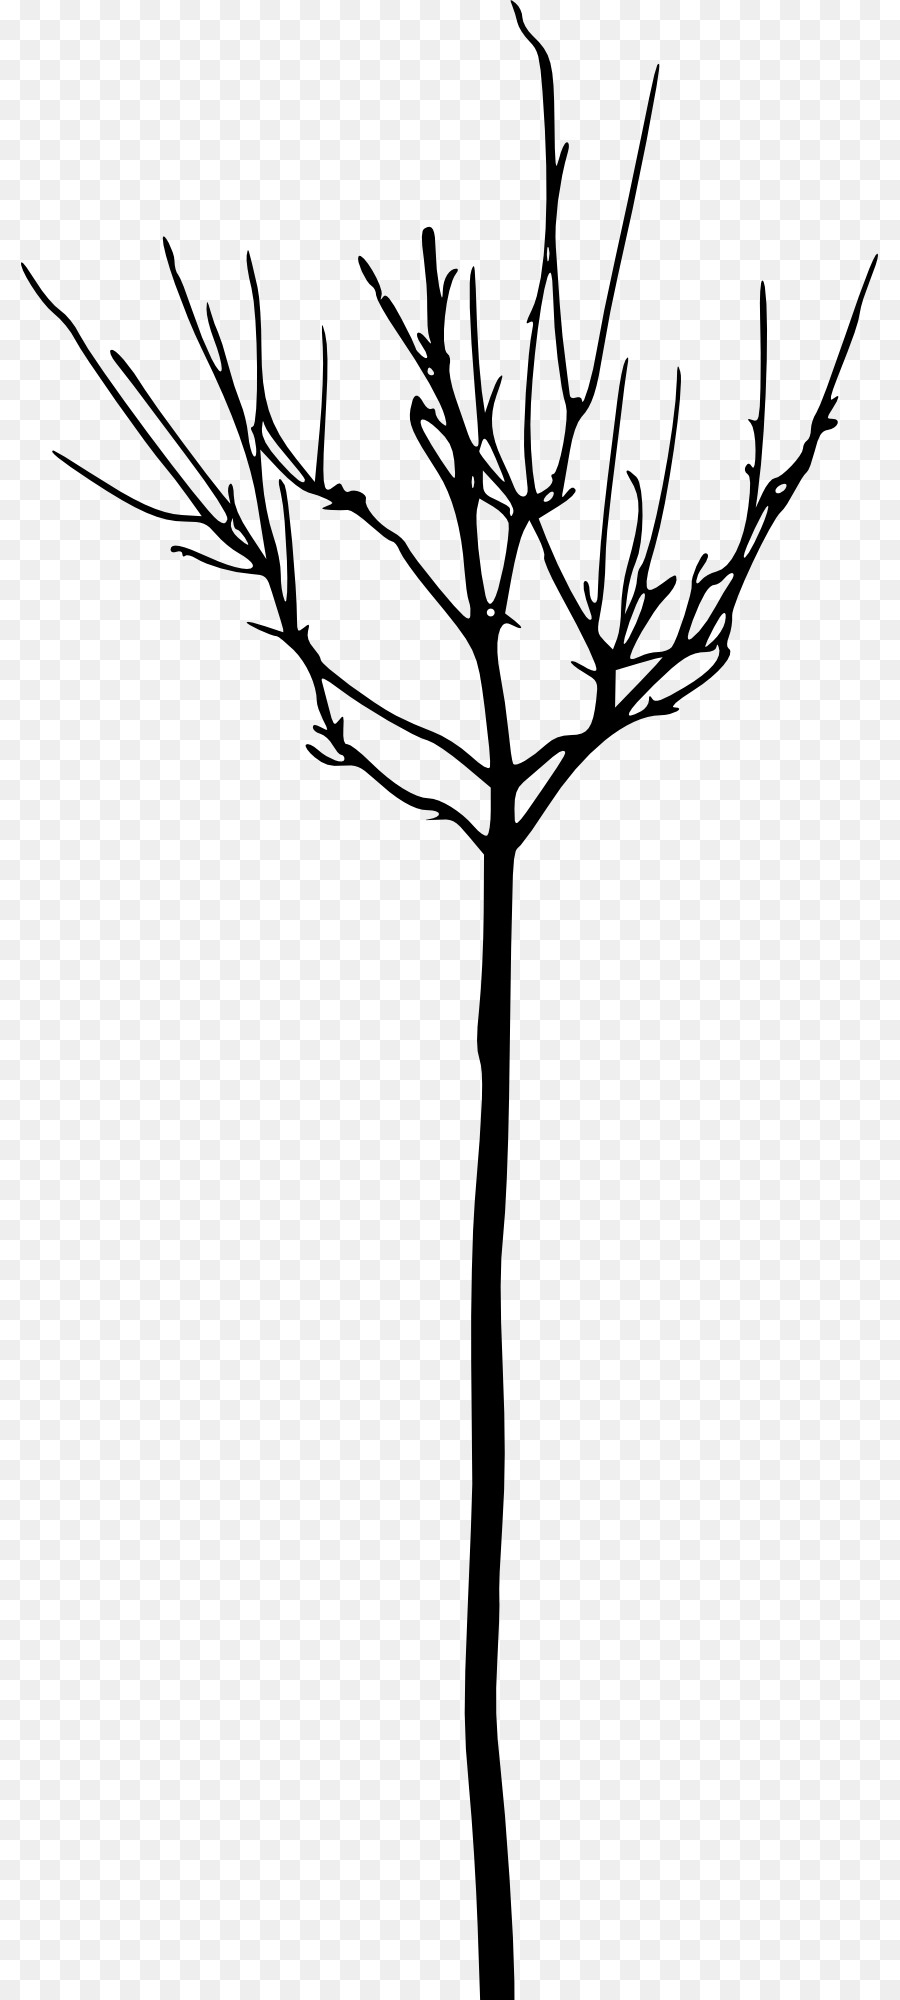 Tree Branch Woody plant Clip art - tree png download - 857*2000 - Free Transparent Tree png Download.